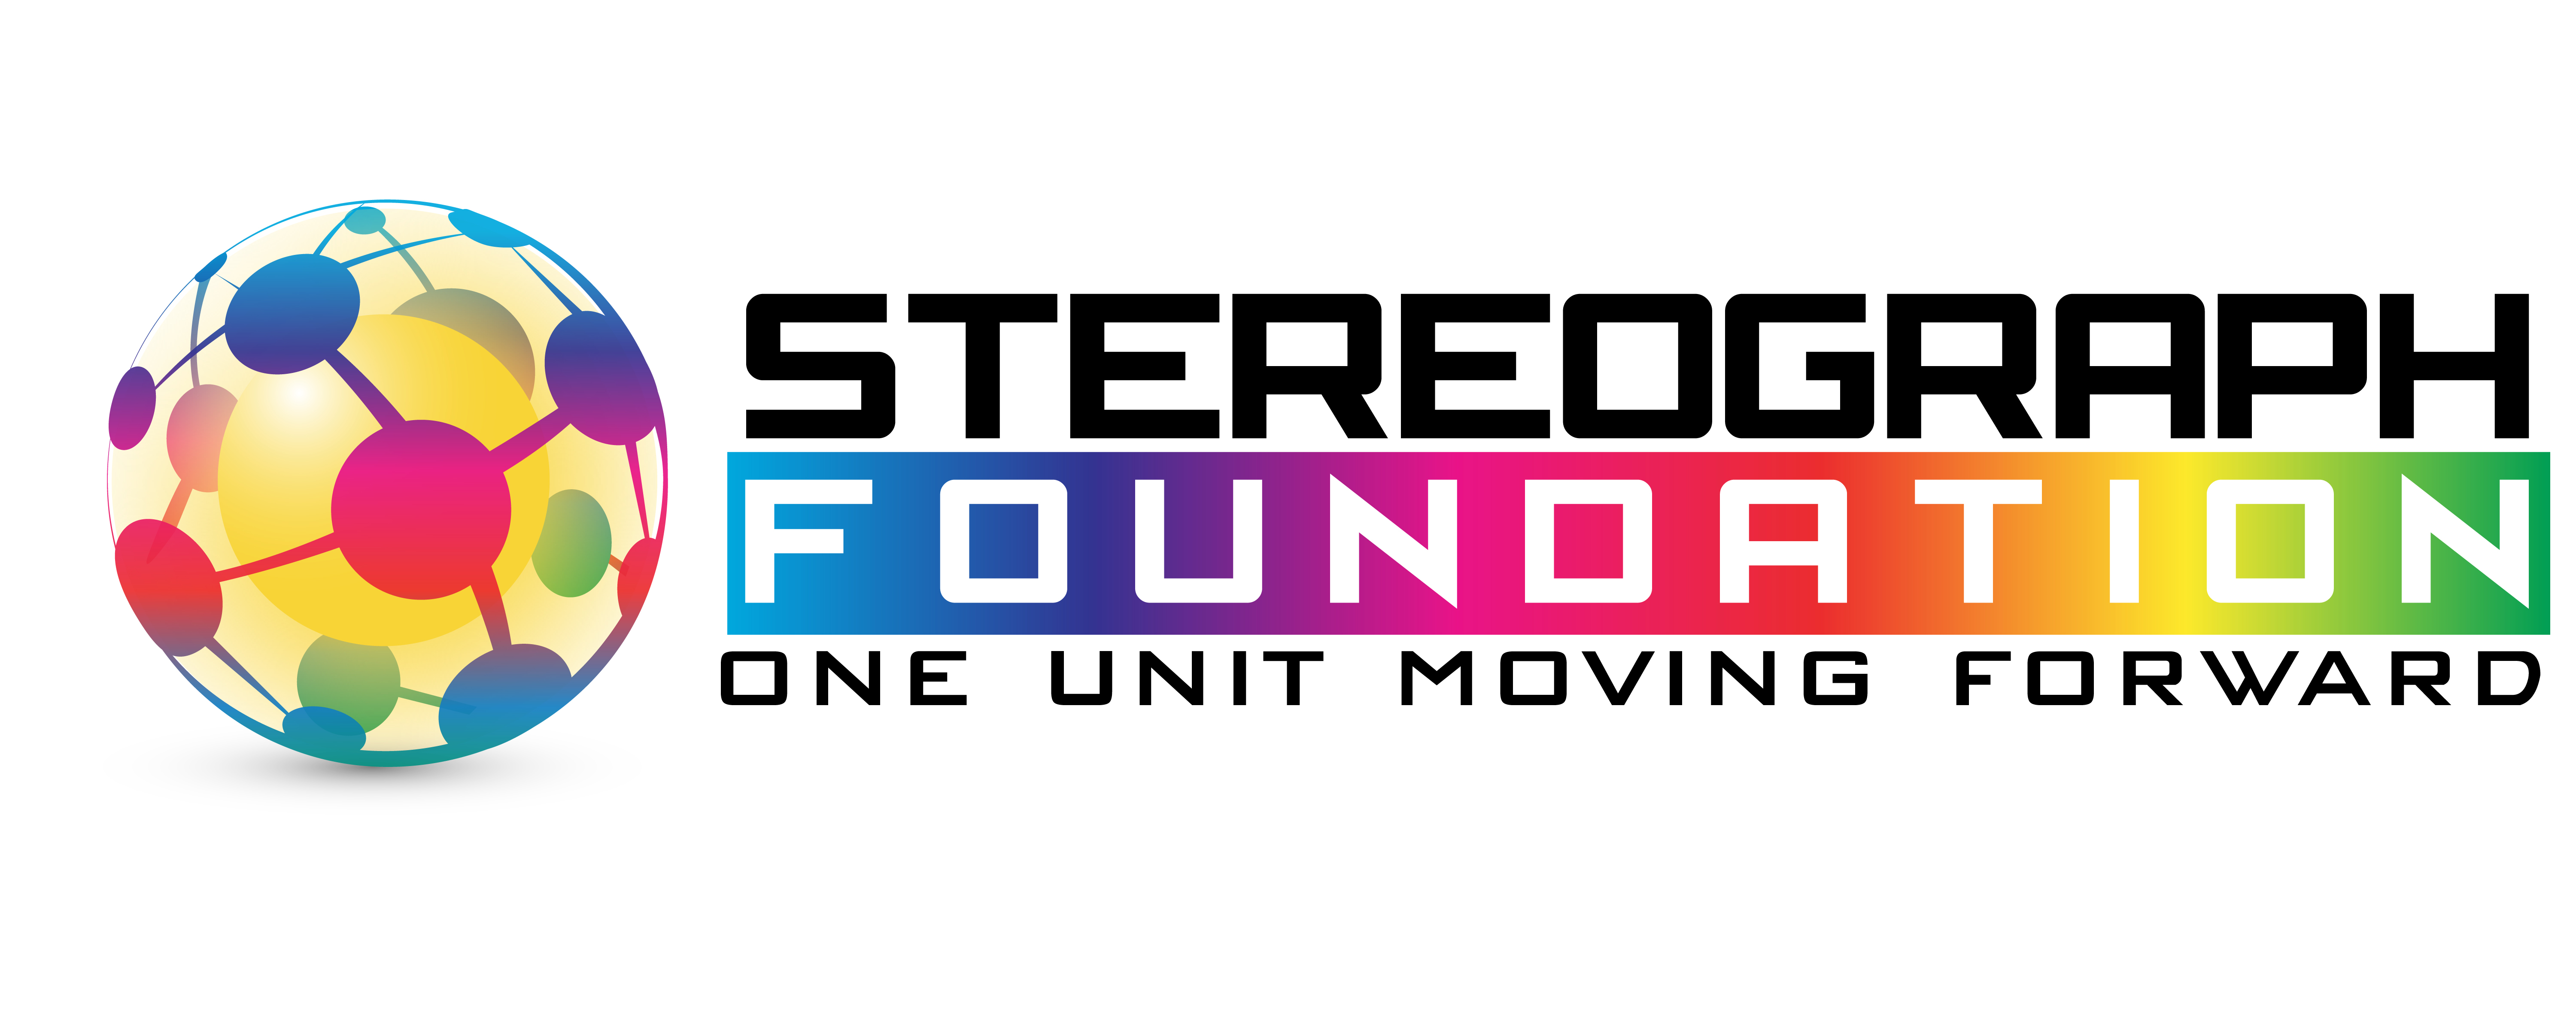 StereoGraph Foundation – One Unit Moving Forward